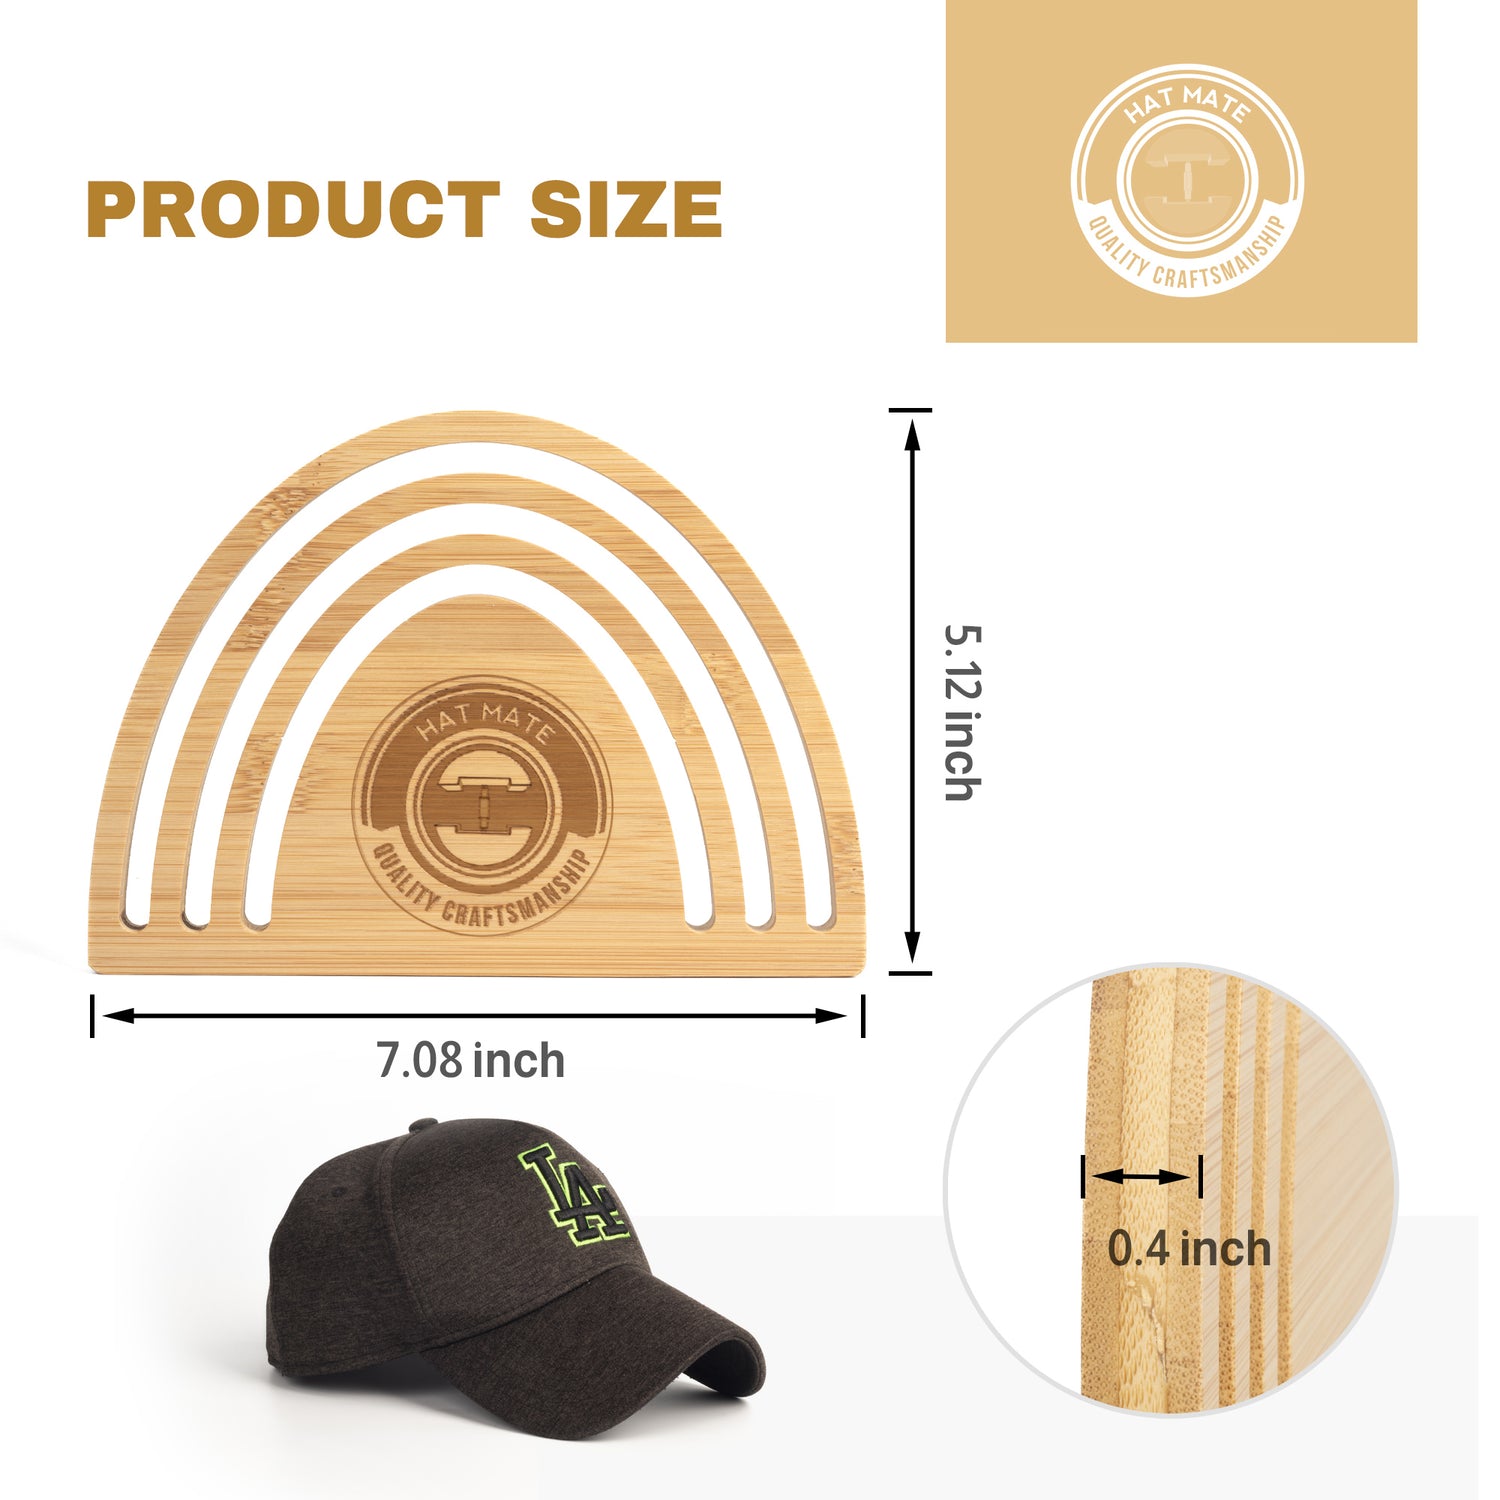 Premium Hat Brim Bender, Free Hat Brush with 2 Bill Bender Tools, Bamboo Design with 3 Shaper Options, Steaming Optional, Hat Curving Band, Baseball